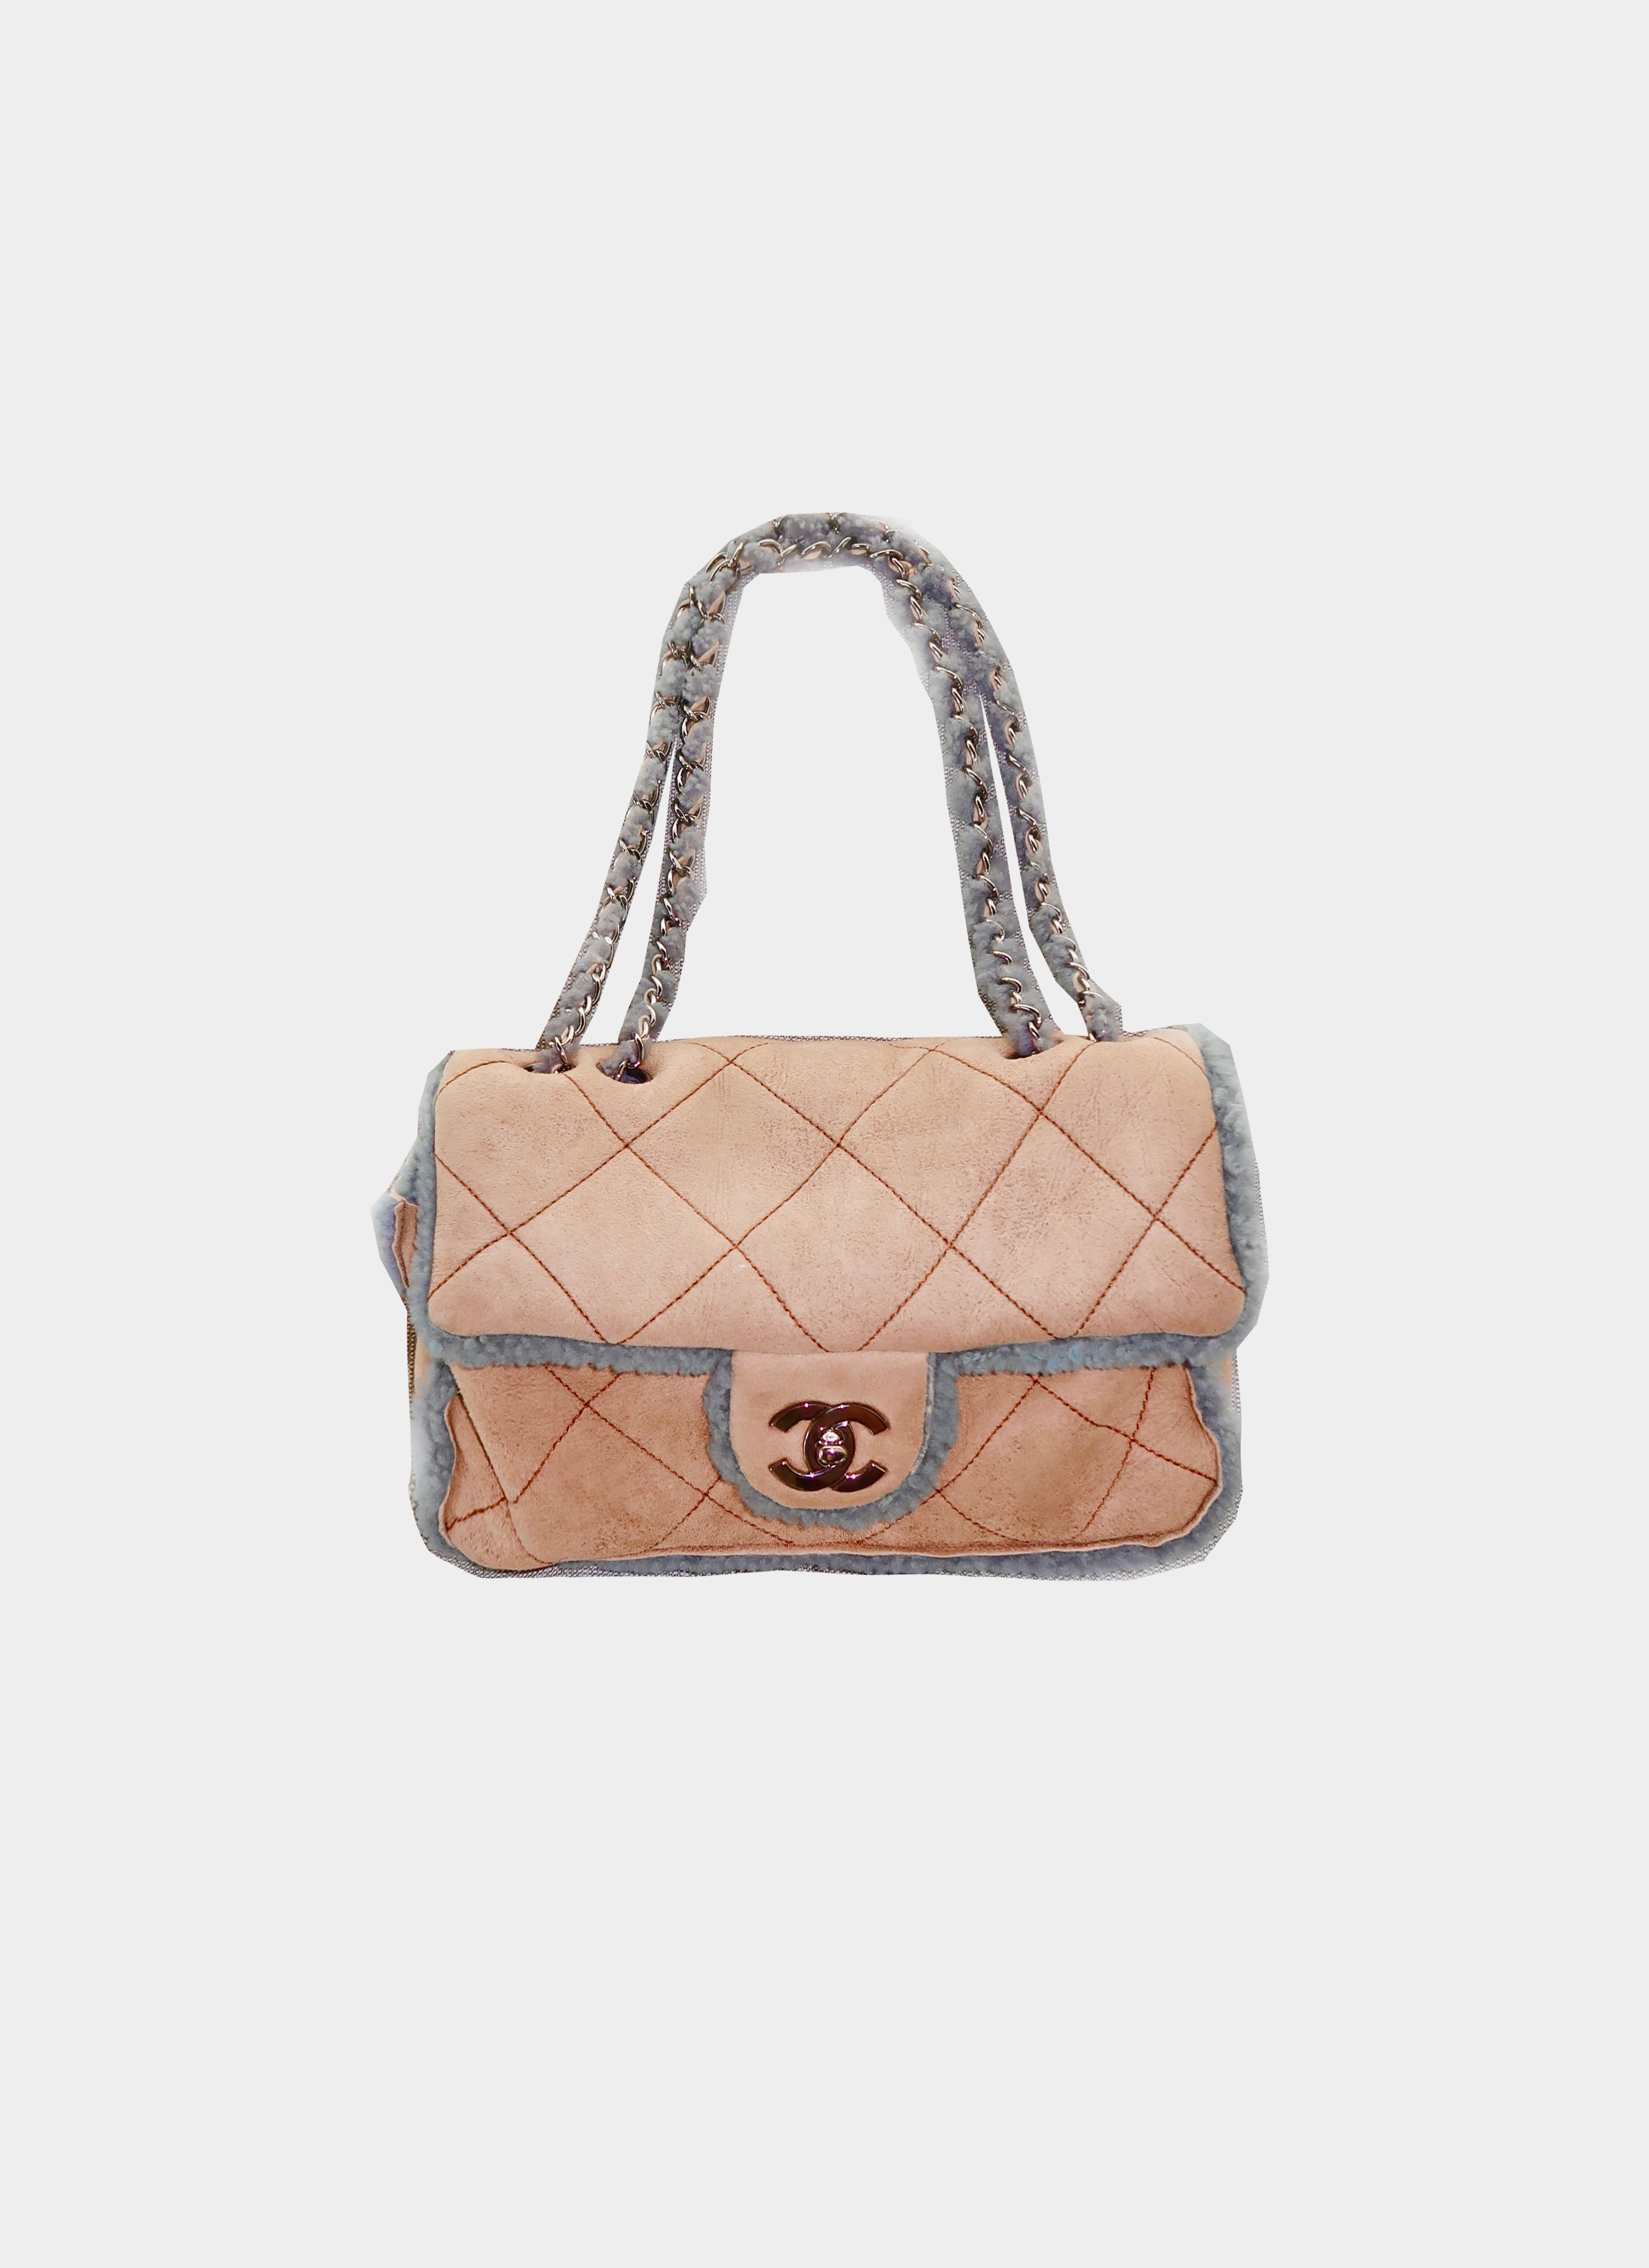 Chanel Brown and Grey 2000s Shearling Flap Bag